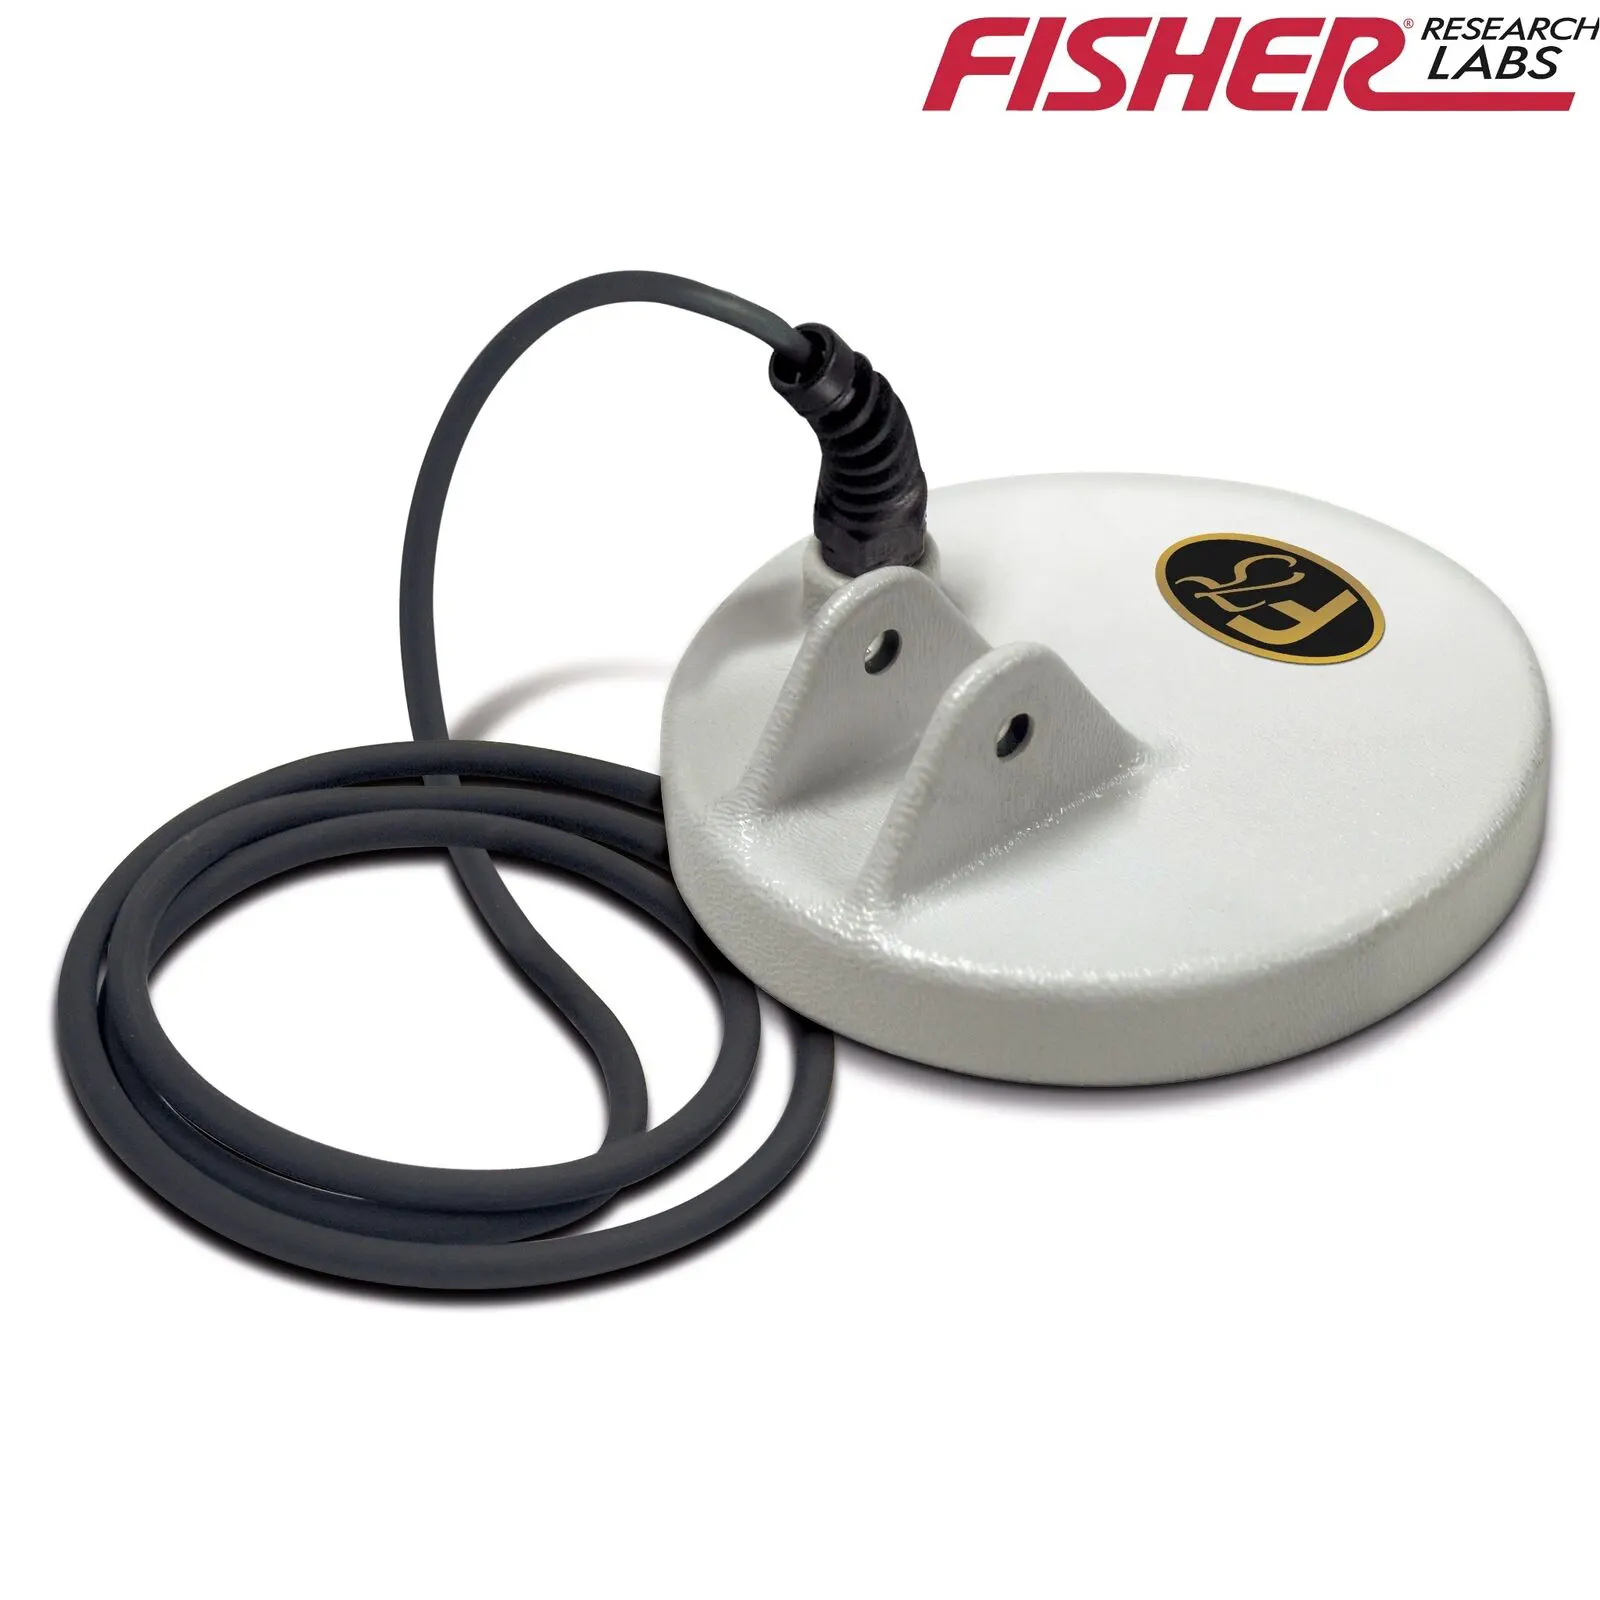 fisher-f75-limited-edition-detector.webp